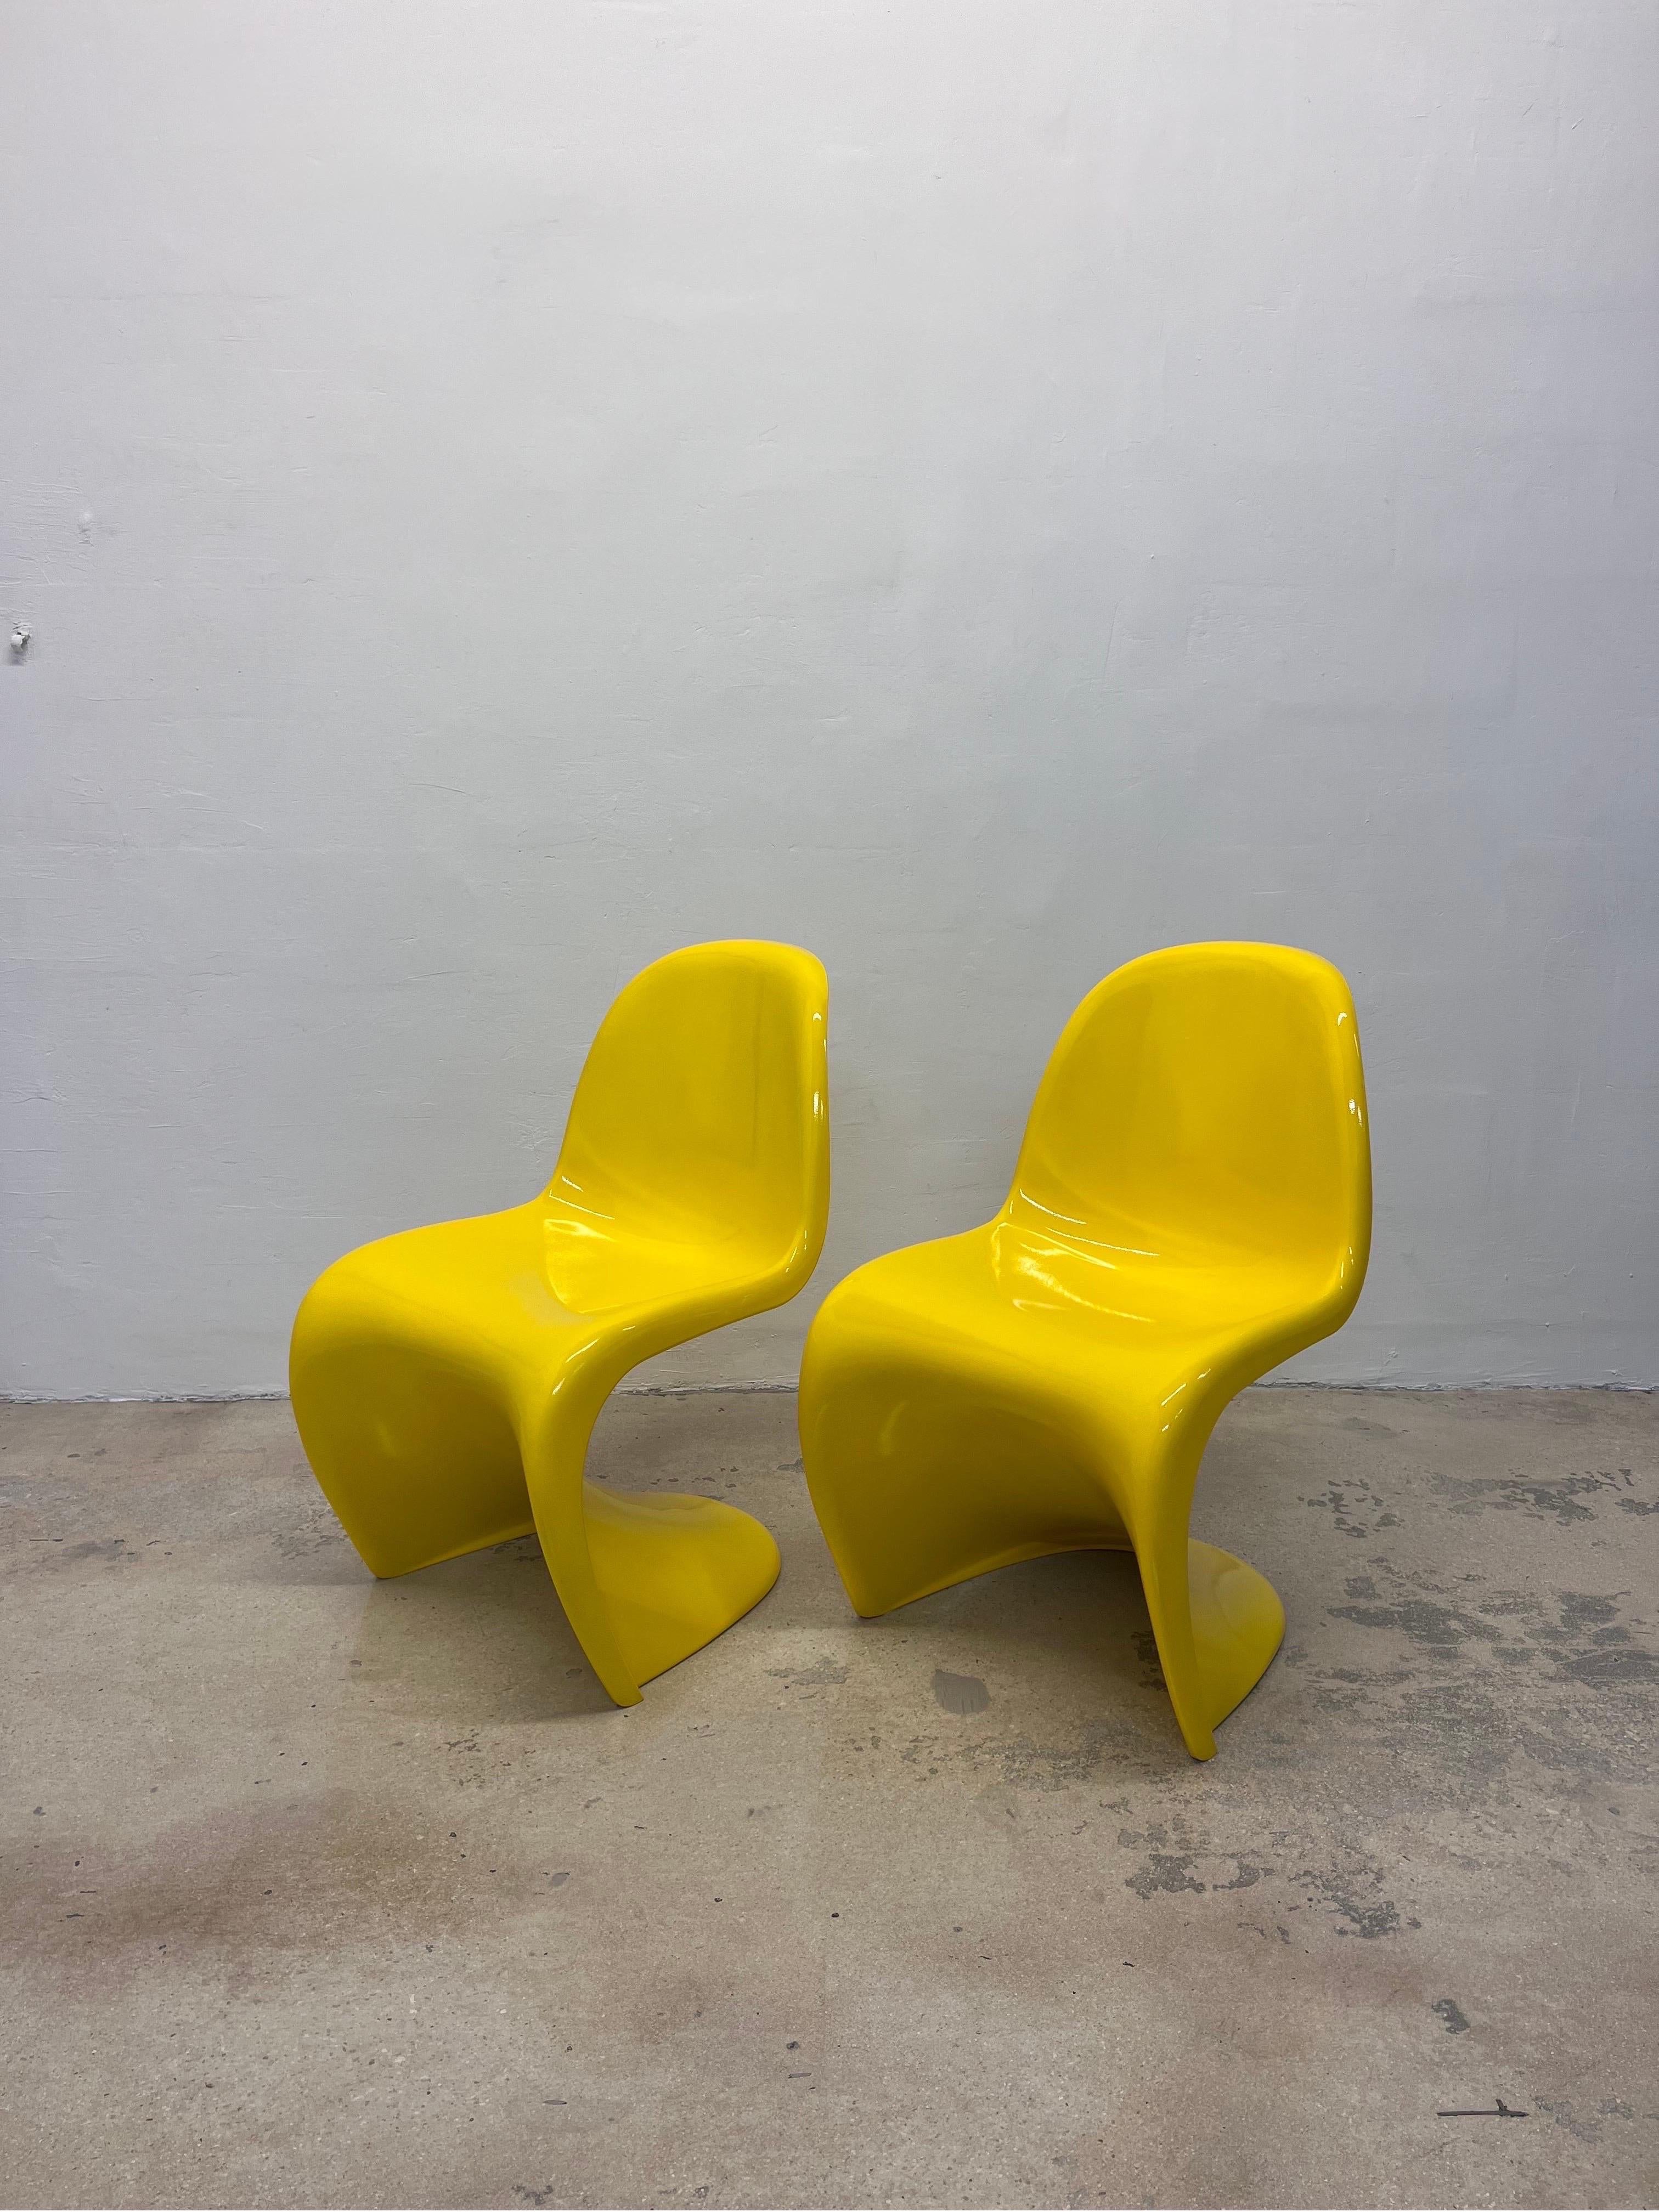 Swiss Verner Panton Classic Panton S Chairs for Vitra, 1990s - a Pair